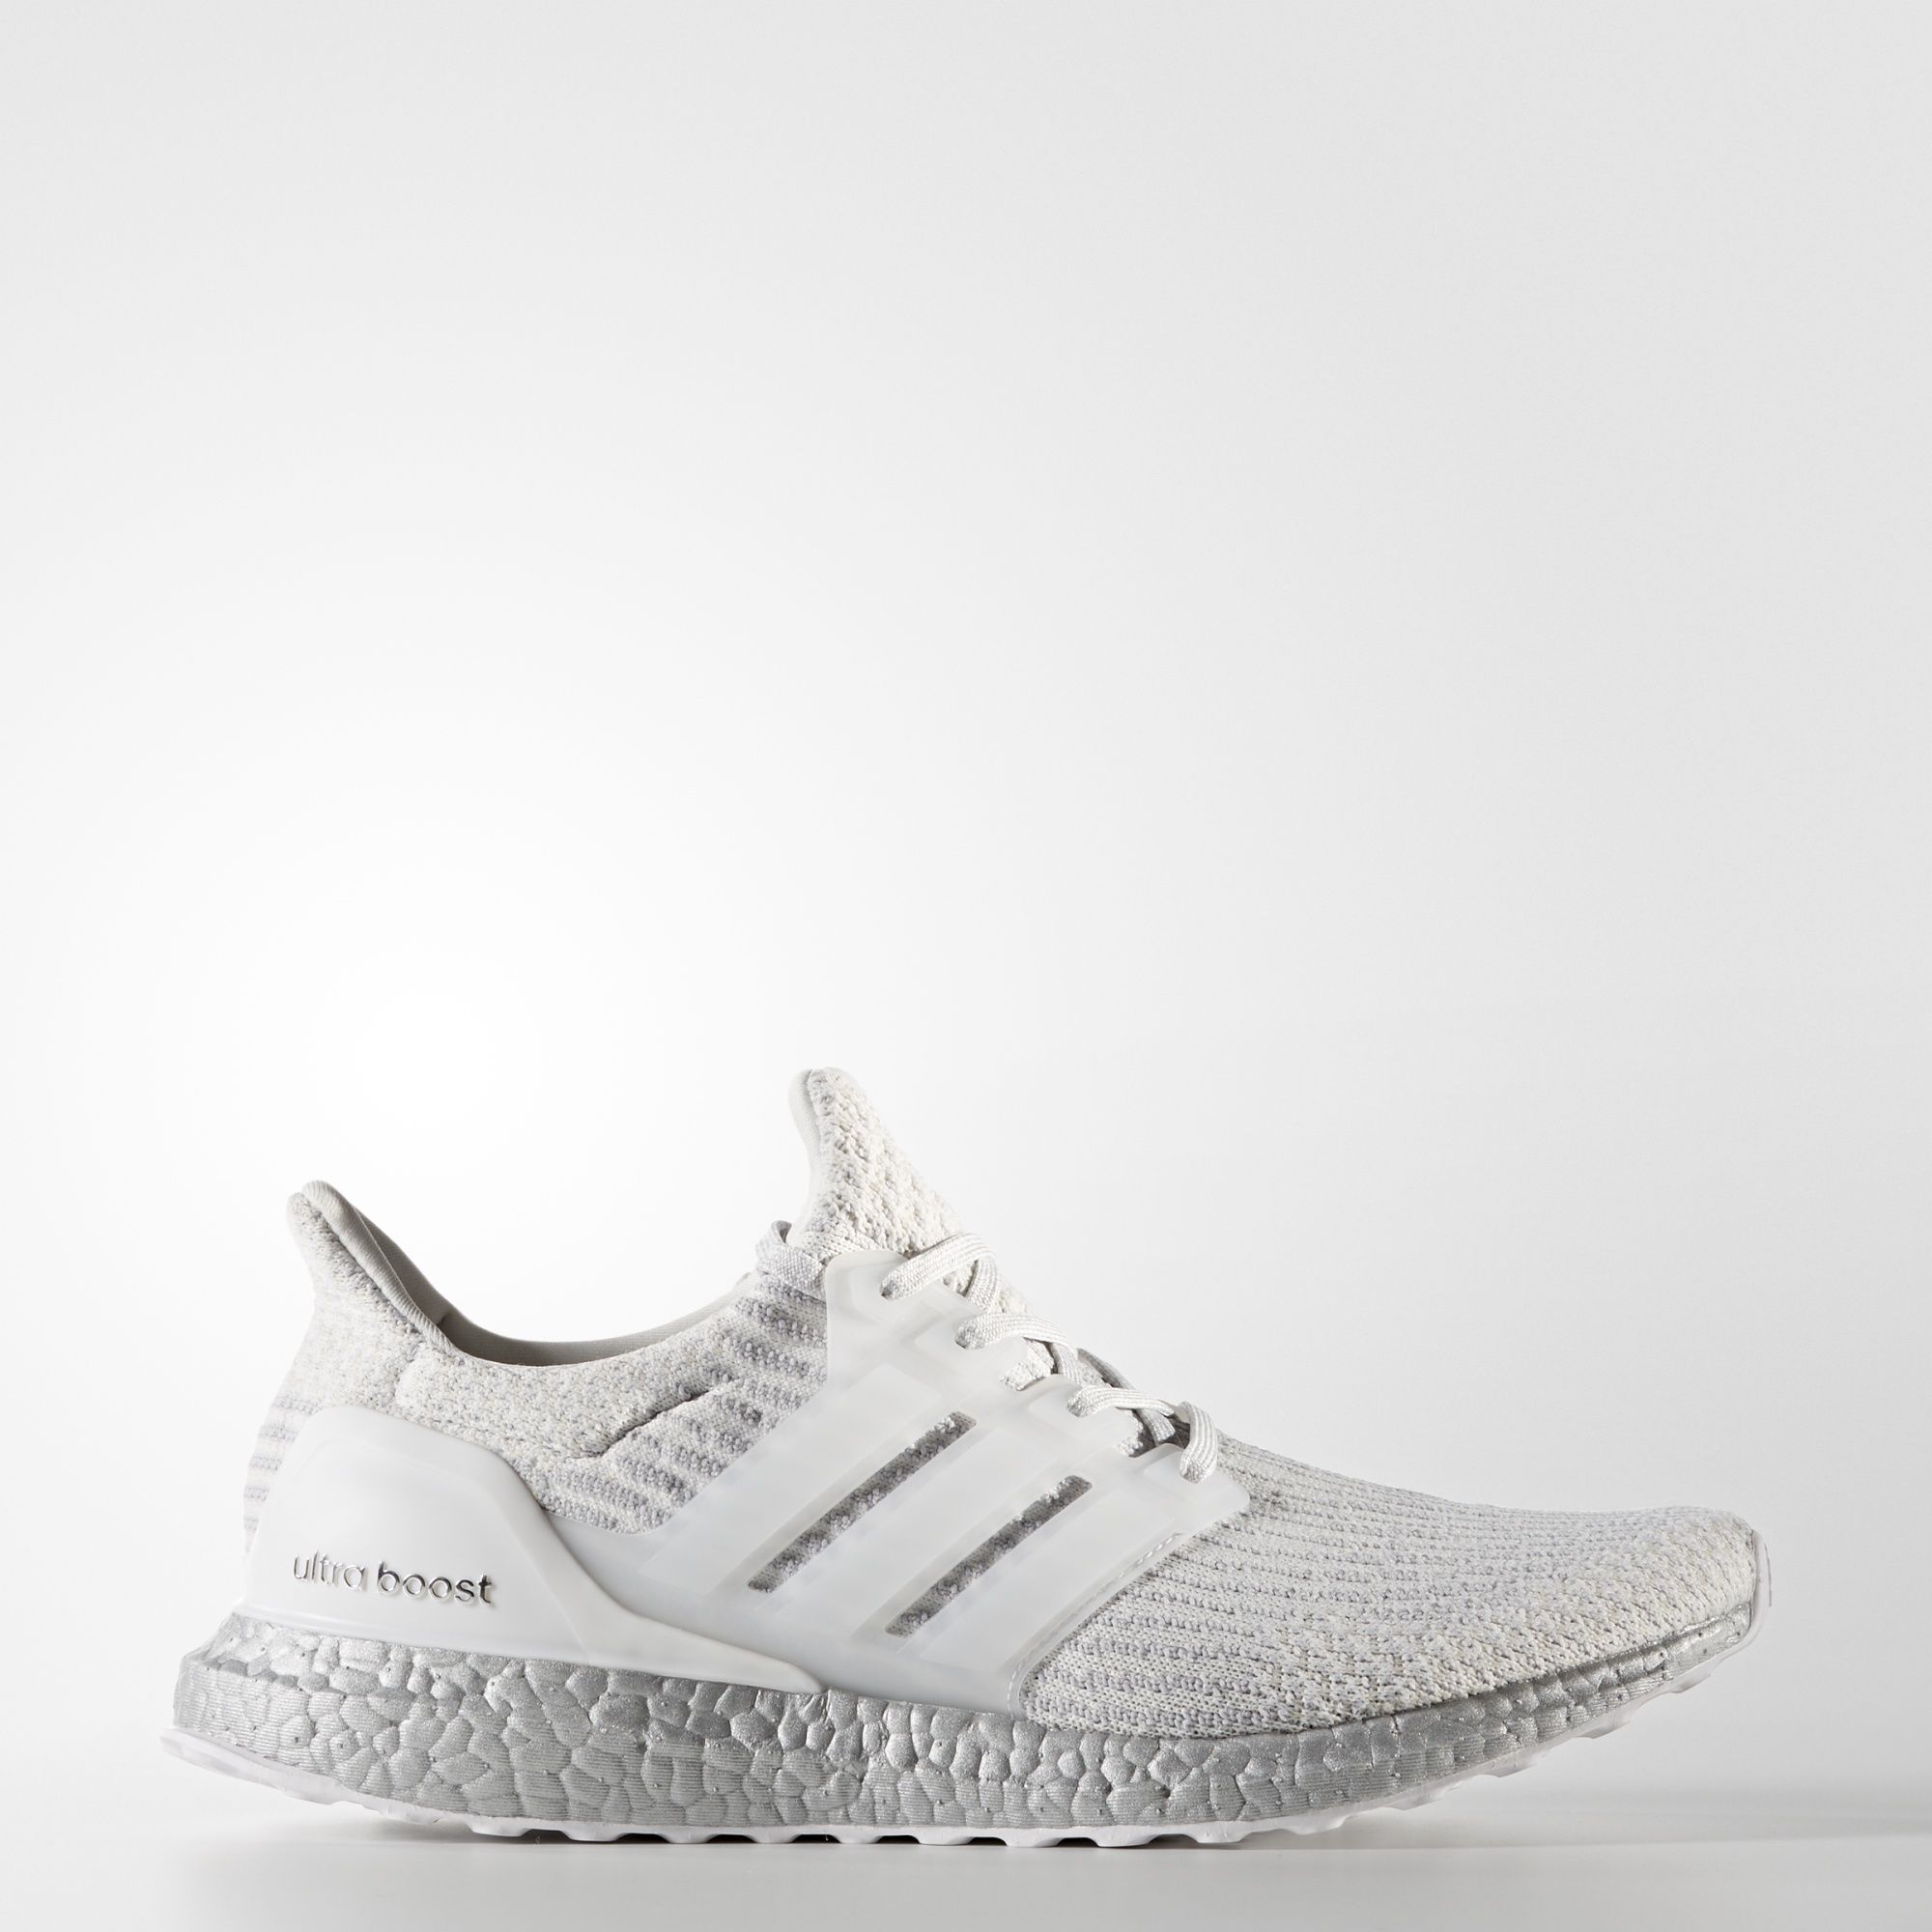 Adidas Ultra Boost
Crystal White / Clear Brown